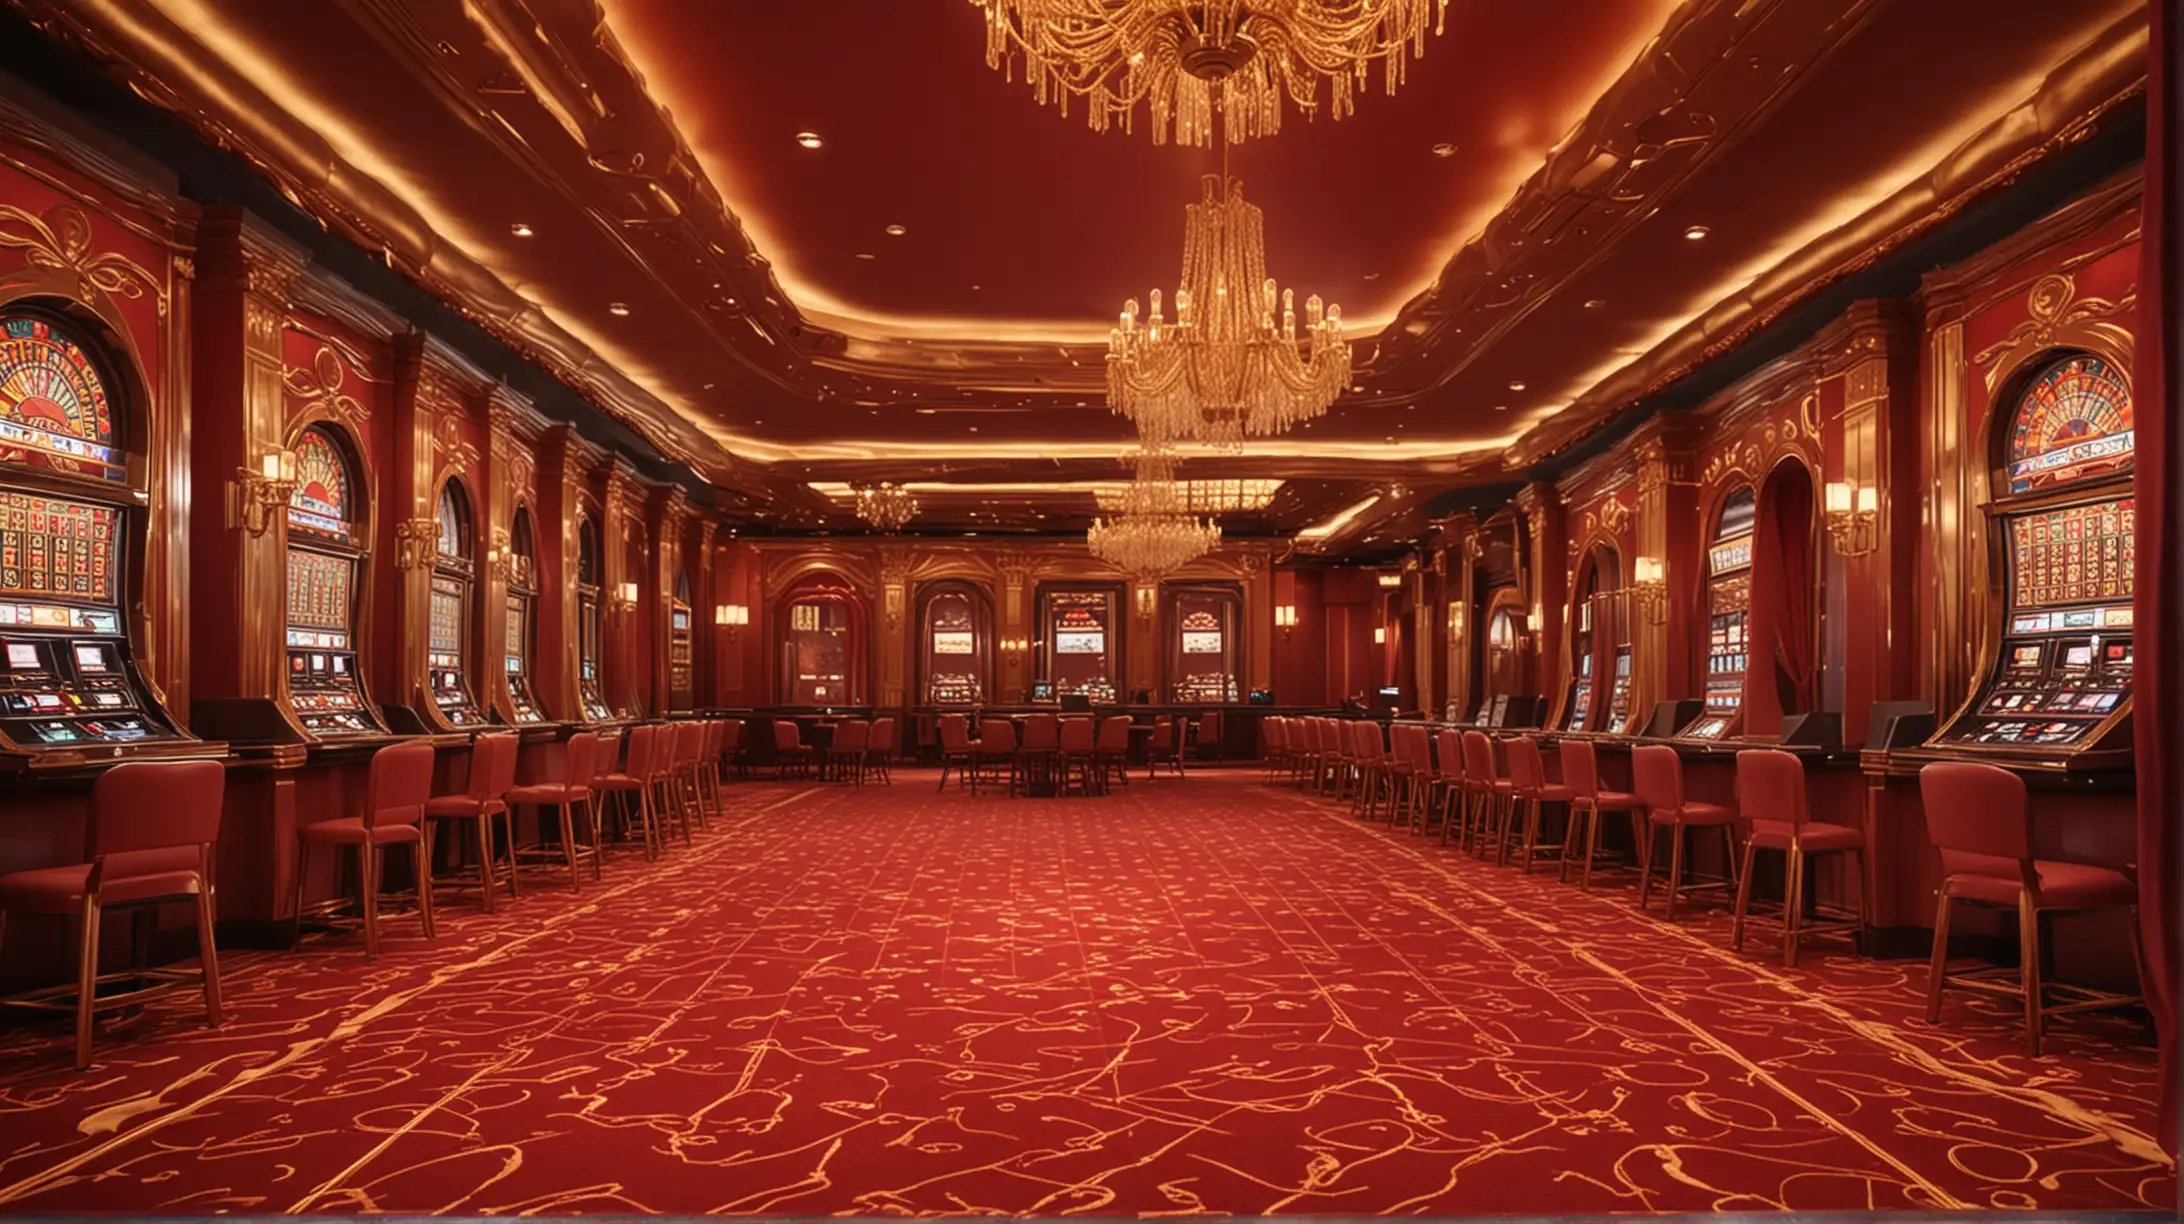 Luxurious Casino Interior Design with Red and Gold Tones